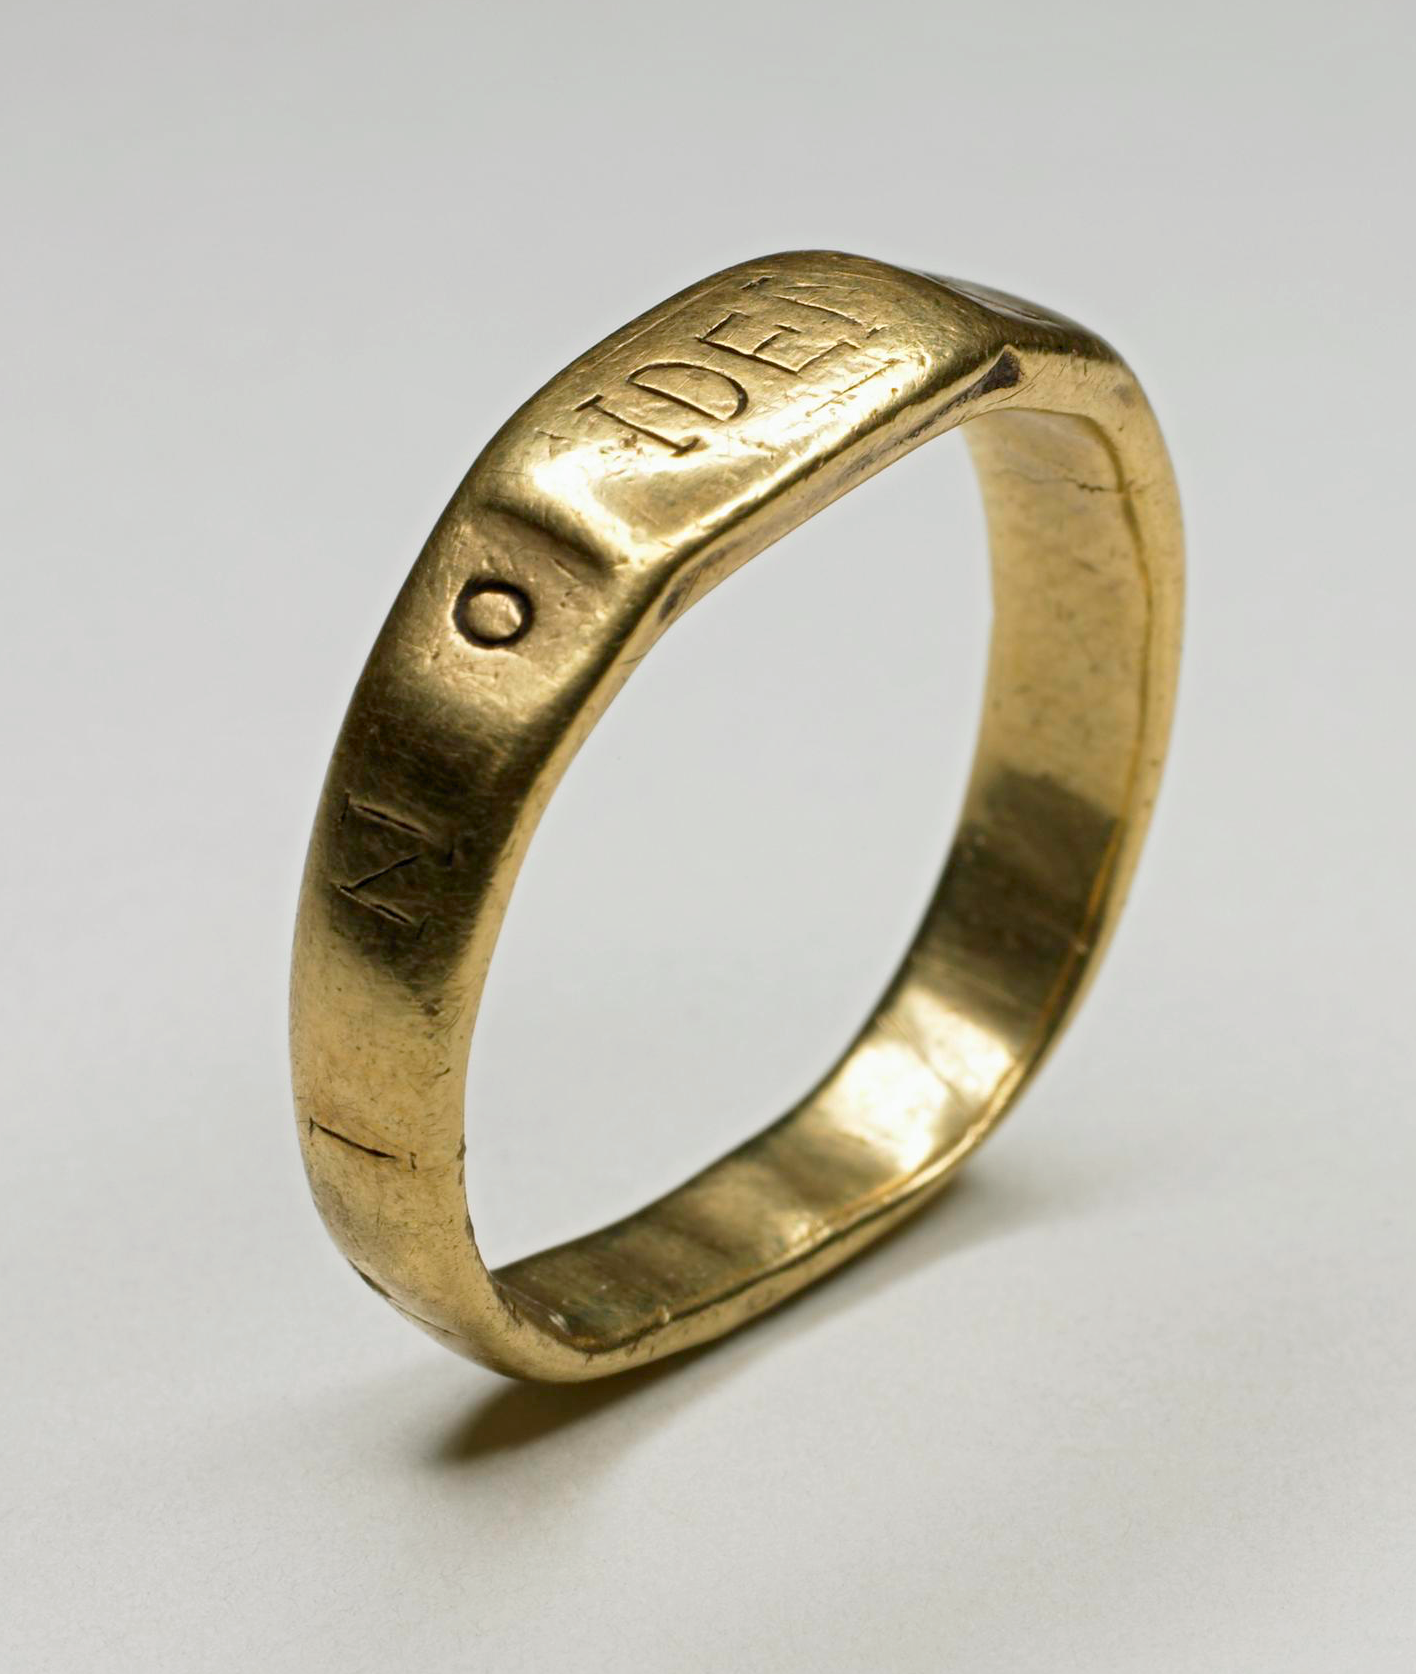 Gold ring inscribed (F)IDE(M) CONSTANINO. Thought to have been gifted to the Emperors officers as a reminder of their loyalty oath. British Museum. 